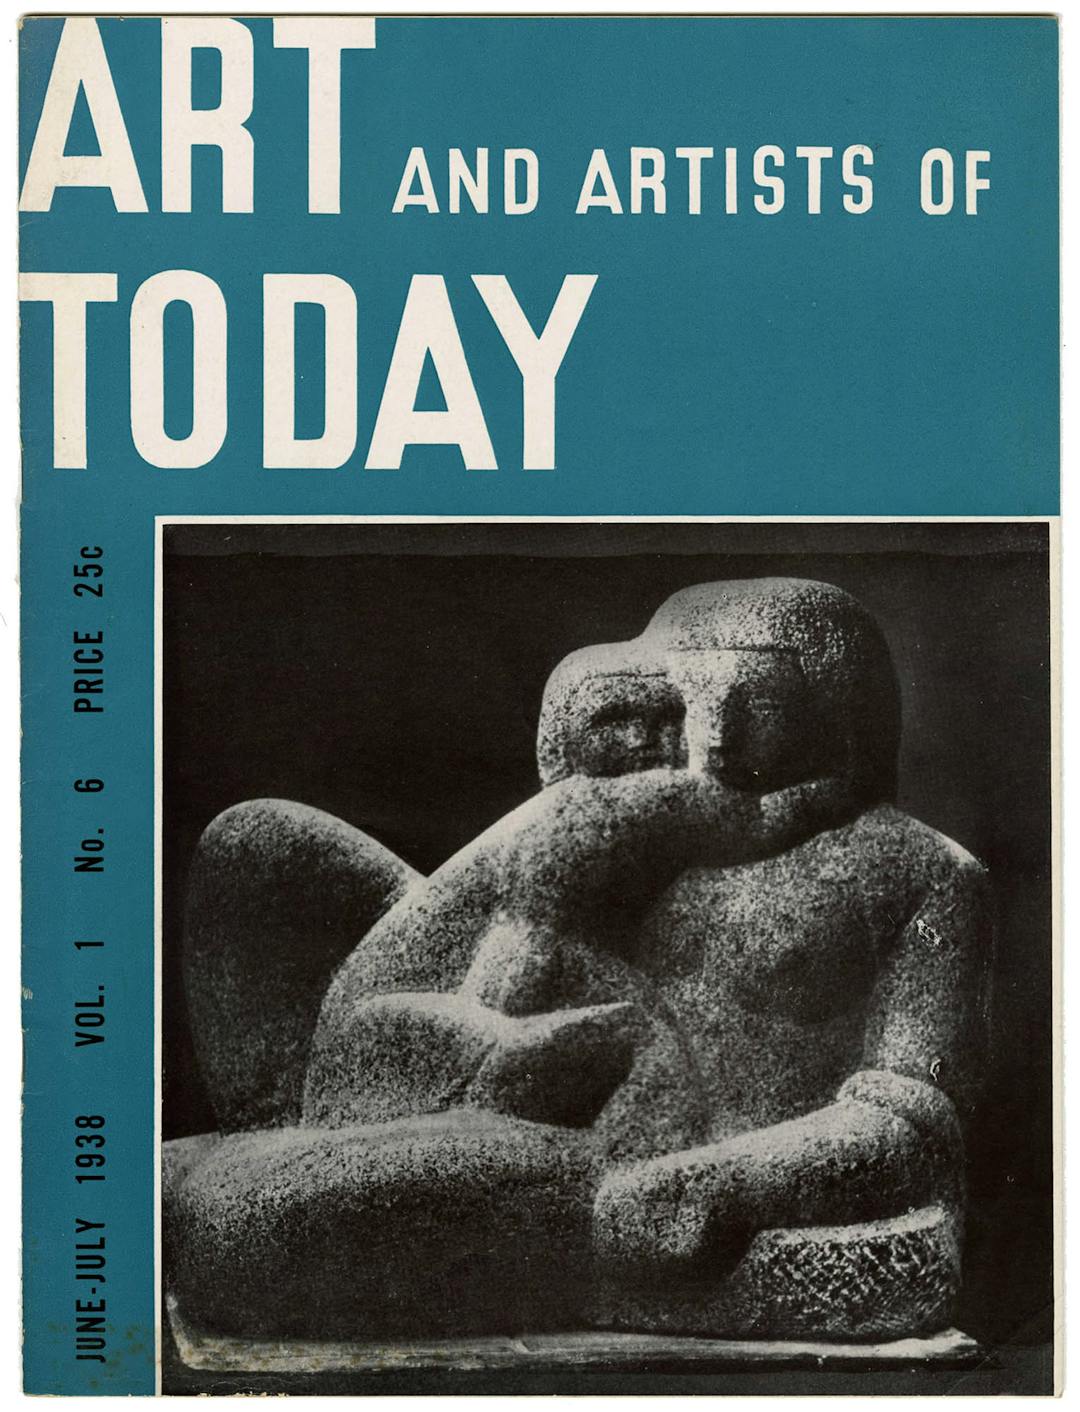 Art and Artists of Today, Vol 1 no. 6, June–July 1938 – The Richard Pousette-Dart Foundation